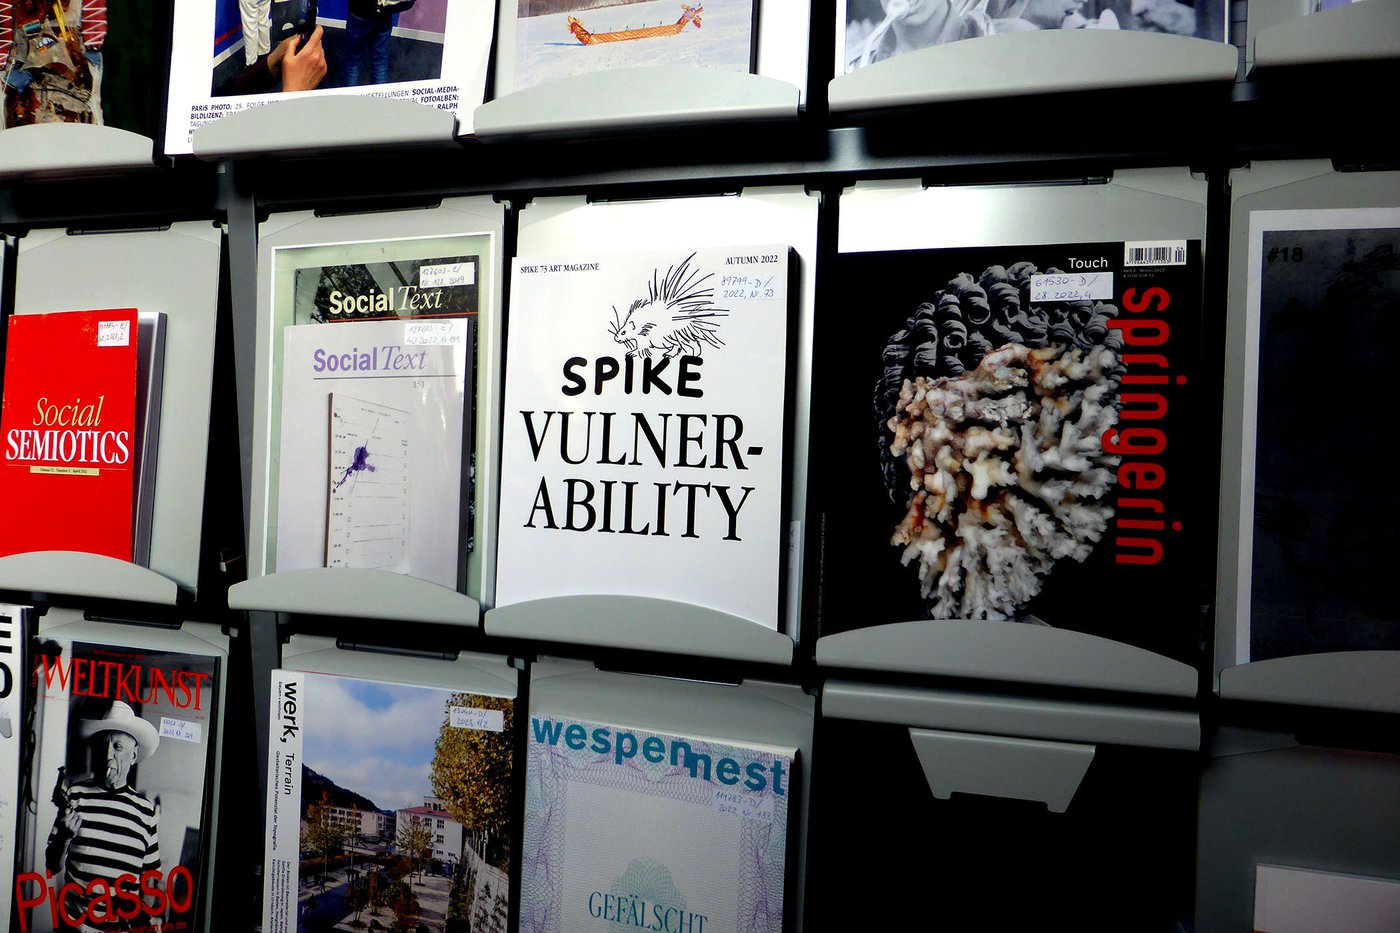 Magazine shelf in the Academy Library with hot off the press titles from the arts and sciences. Among others, the following magazines can be recognized: "Social Semiotics", "Social Text", "Spike", "Weltkunst", "werk, bauen+wohnen", and "wespennest".